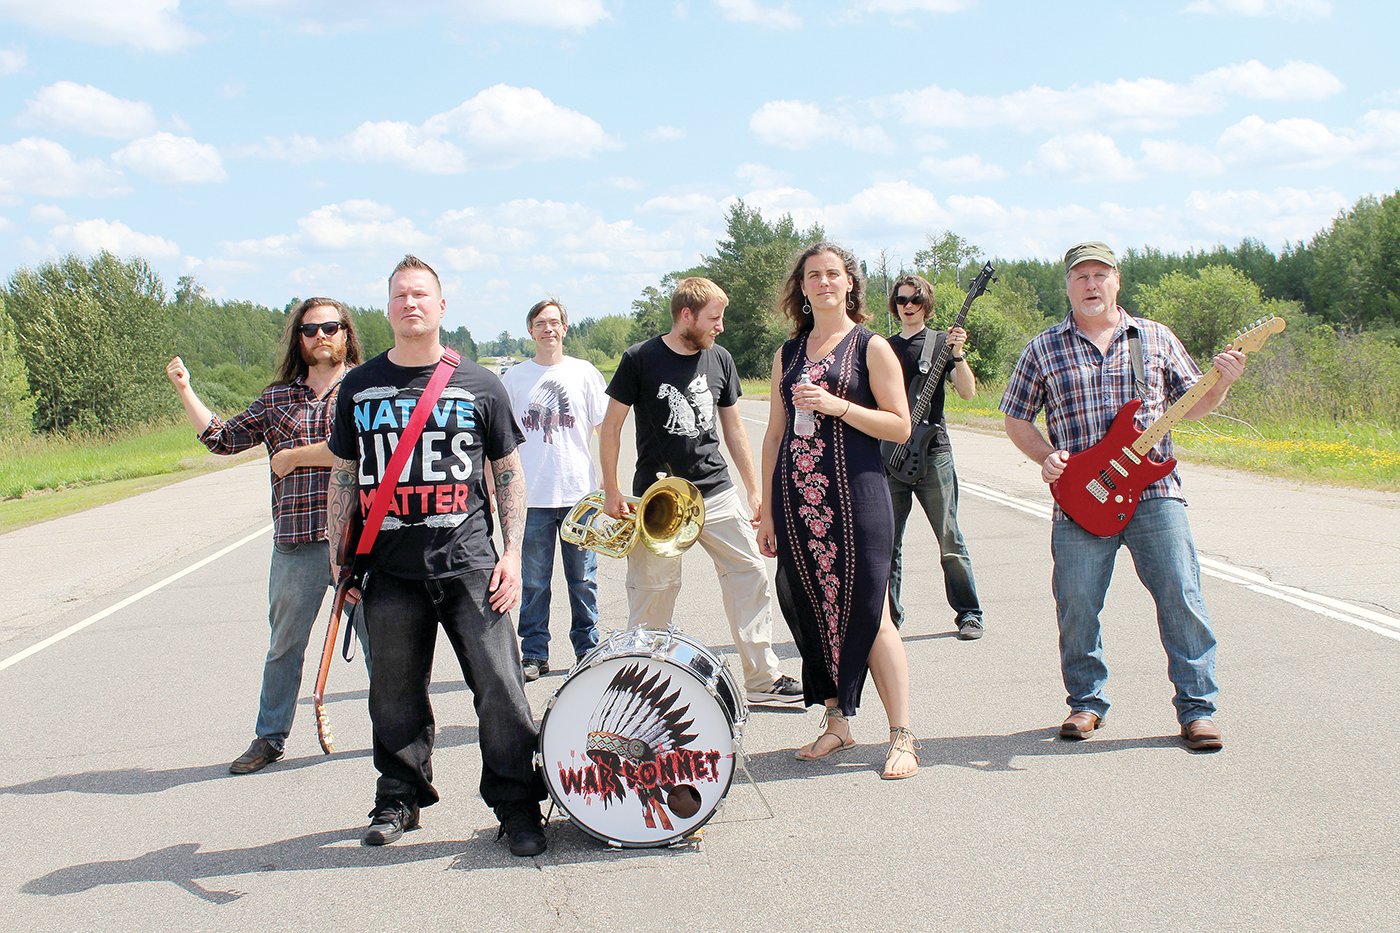 War Bonnet and their performance ensemble. Left to right are: Tom Frichek, Chaz Wagner, Tony Parson, Alex Mahne, Becky Frichek, Sean Zarn and Eric Krenz.